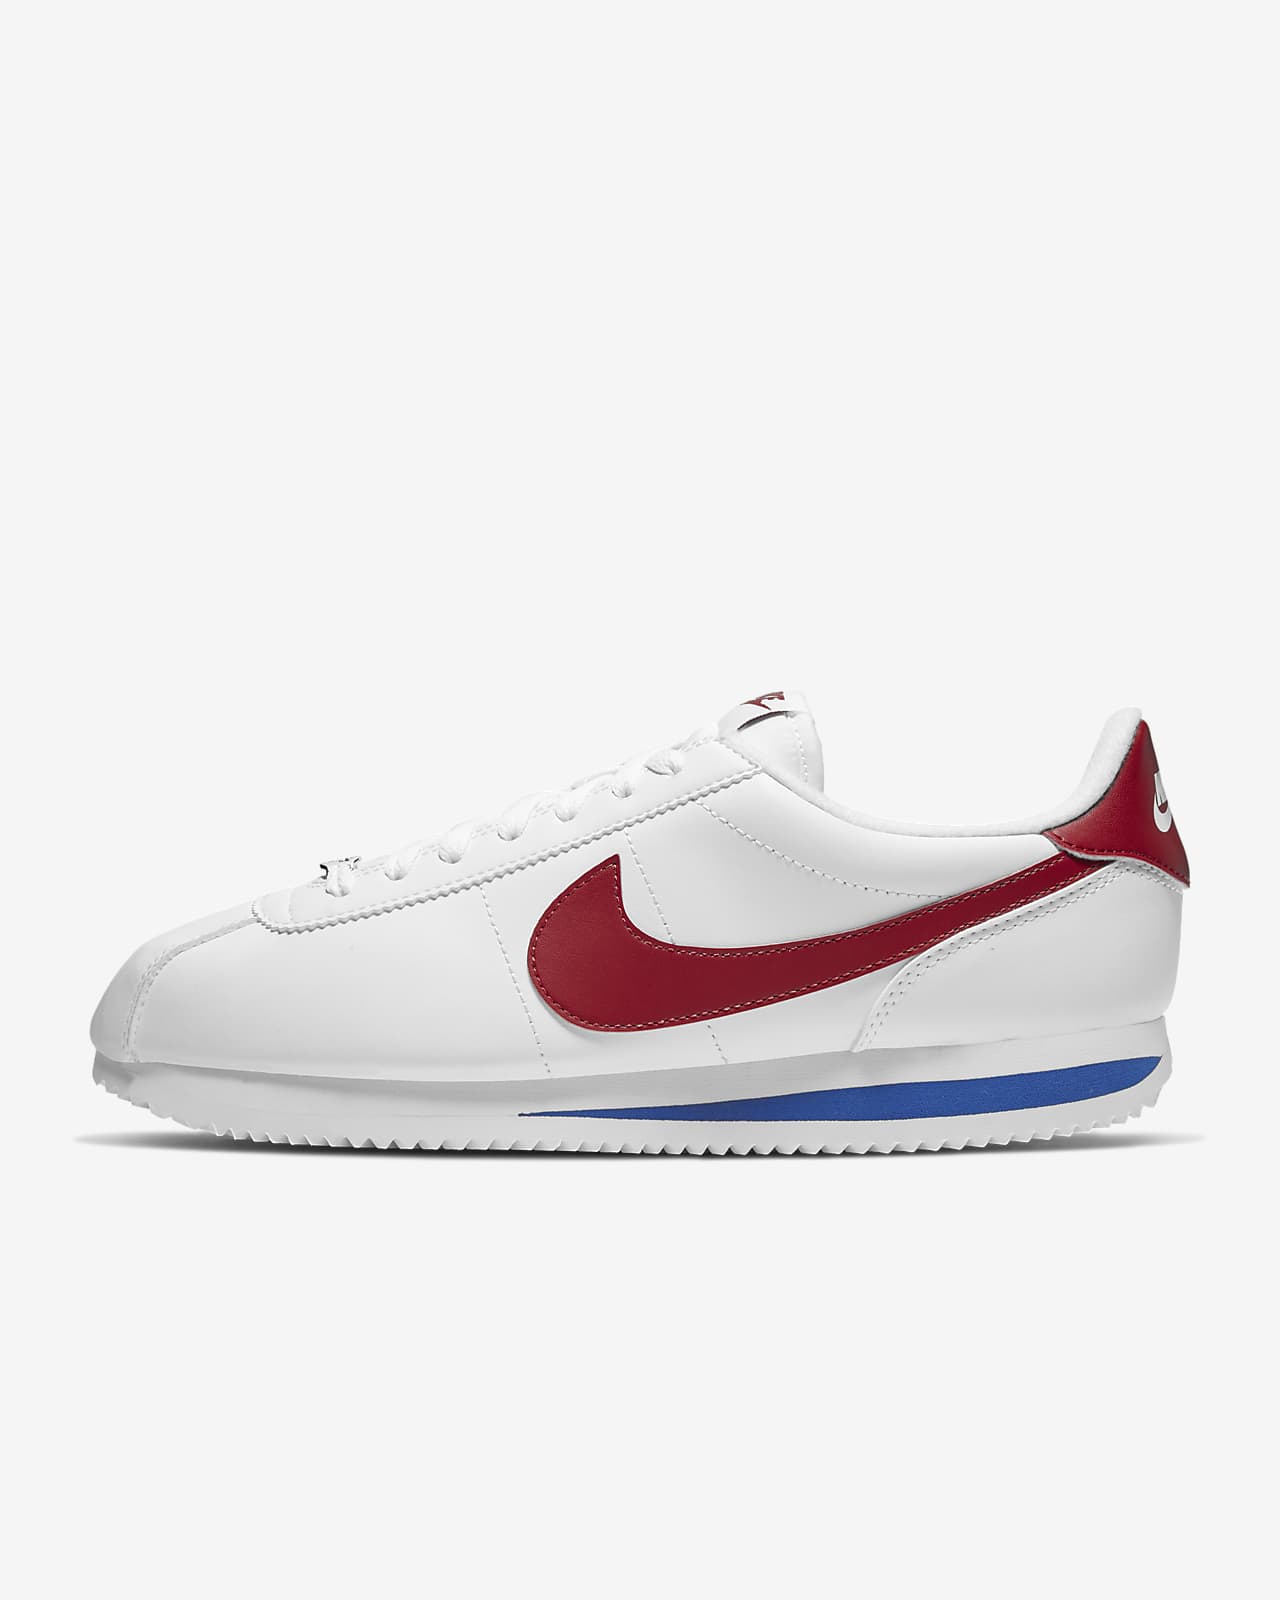 Nike Cortez Wallpapers - Wallpaper Cave